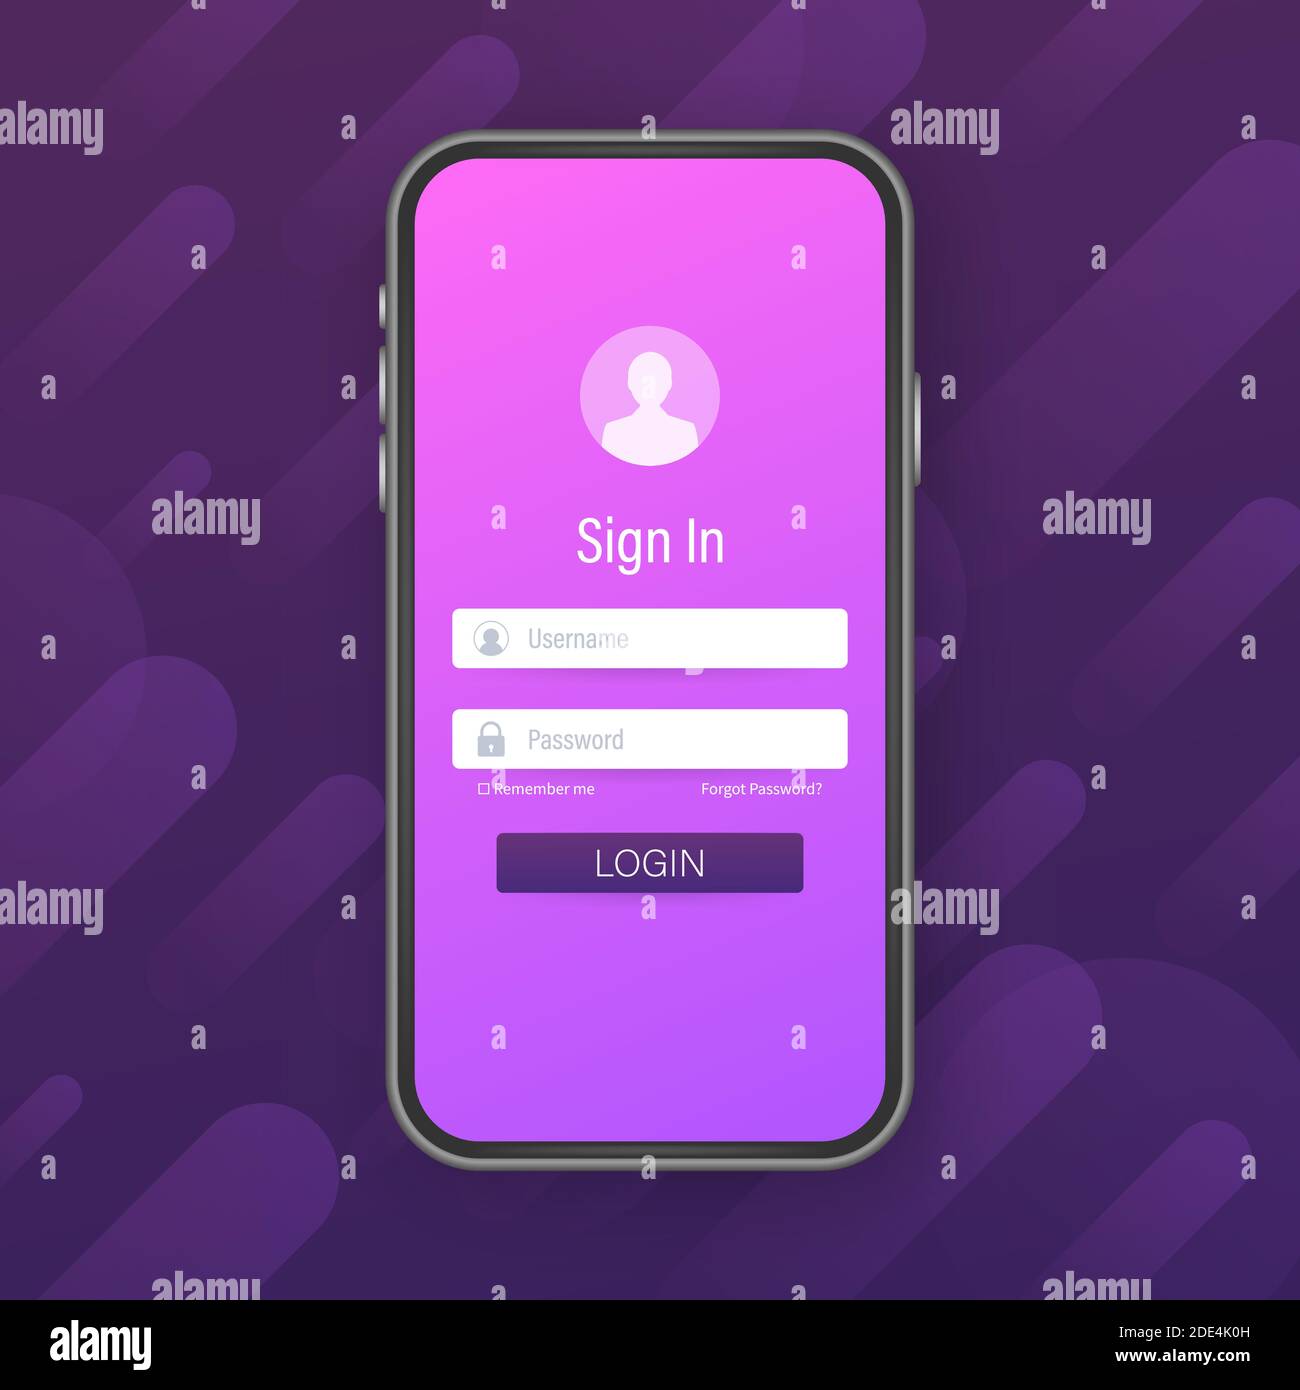 Clean Mobile UI Design Concept. Login Application with Password Form ...